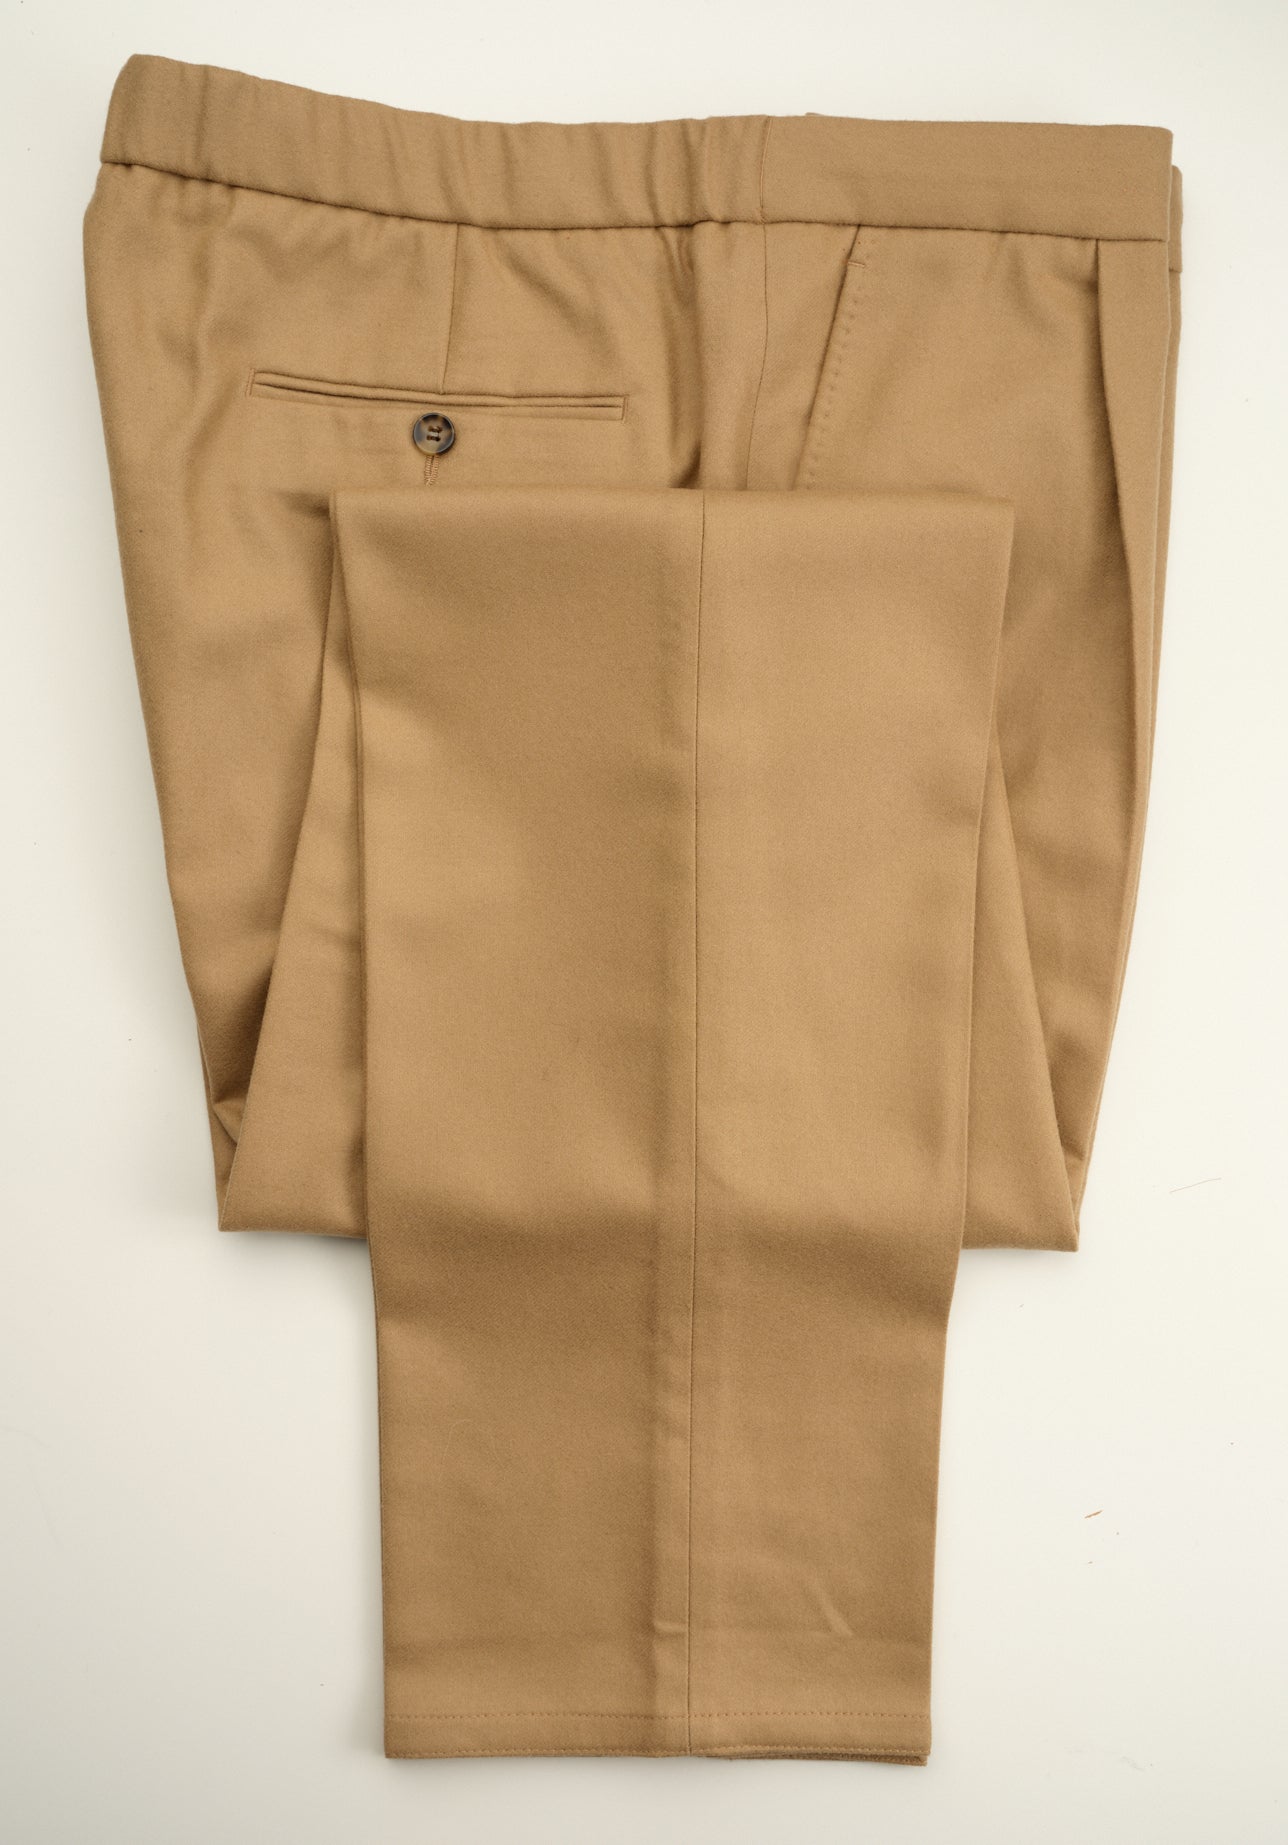 New Suitsupply Ames Pleat Camel Pure Circular Wool Flannel Drawstring Pants - Waist Size 34 and 38